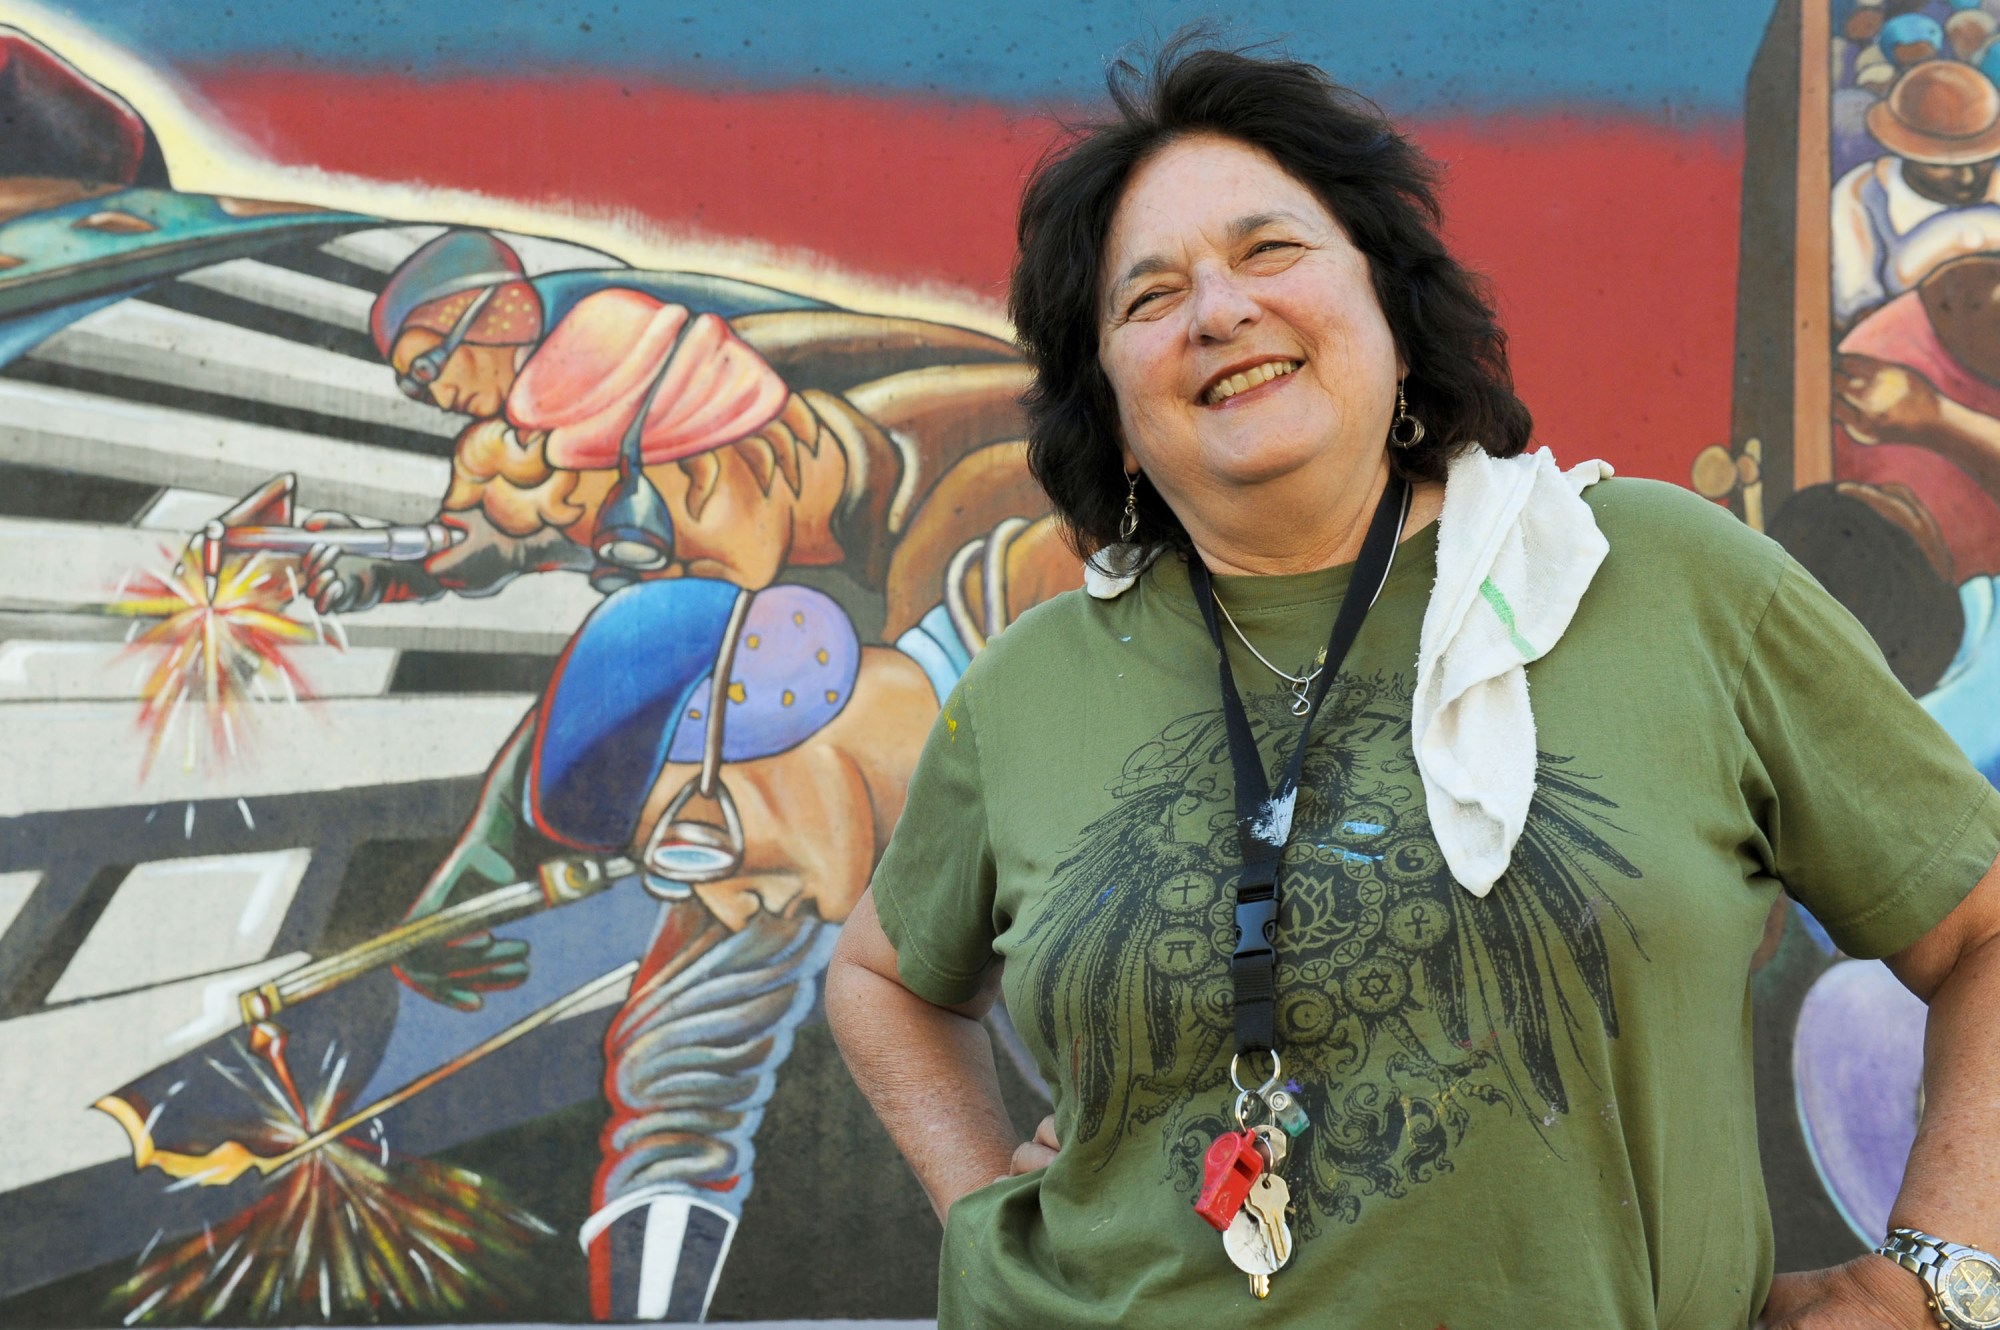 Artist Judy Baca at The Great Wall of Los Angeles, the longest mural in the world, during its 2011 restoration in Valley Glen. (File photo by Michael Owen Baker, LA Daily News/SCNG)